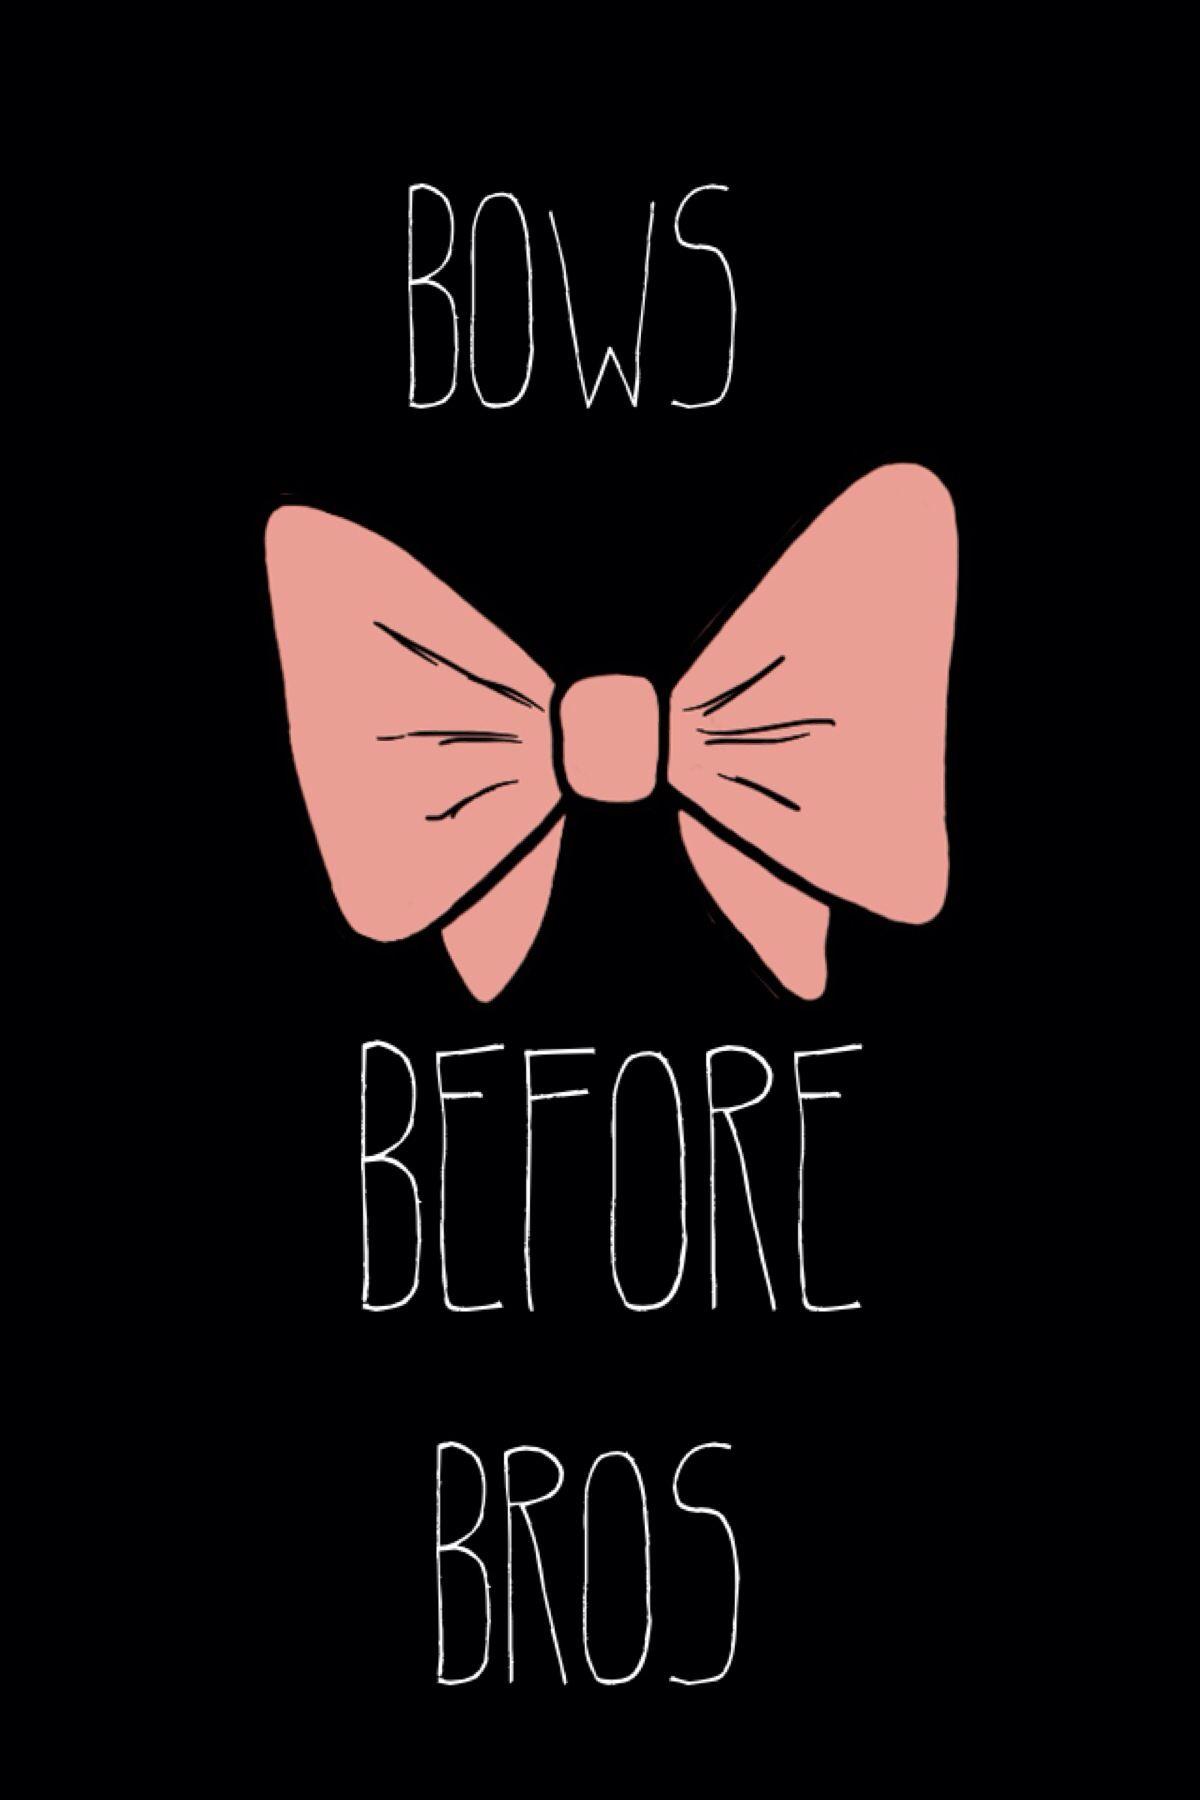 Bows Before Bros. Bows Before Bros Me. Bow Wallpaper, Bow